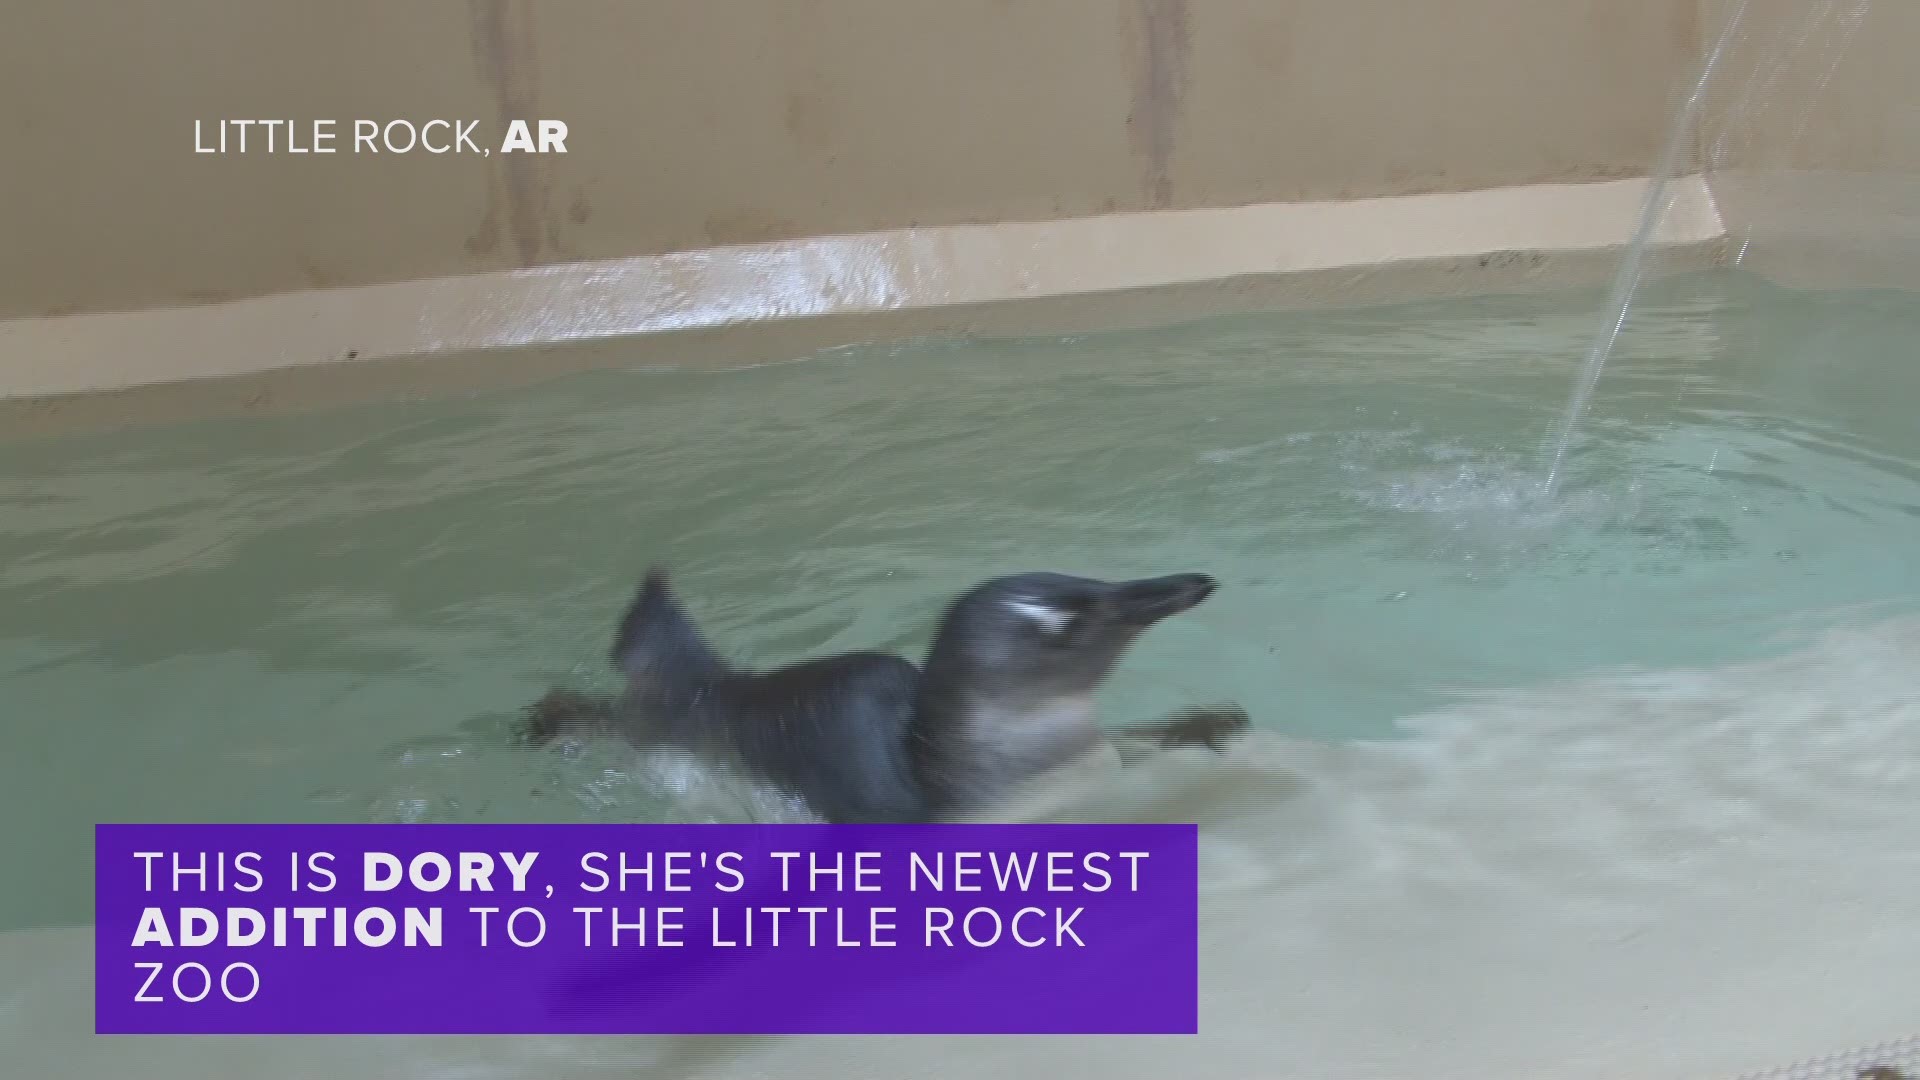 Everyone join us in welcoming Little Rock's newest baby penguin, Dory!